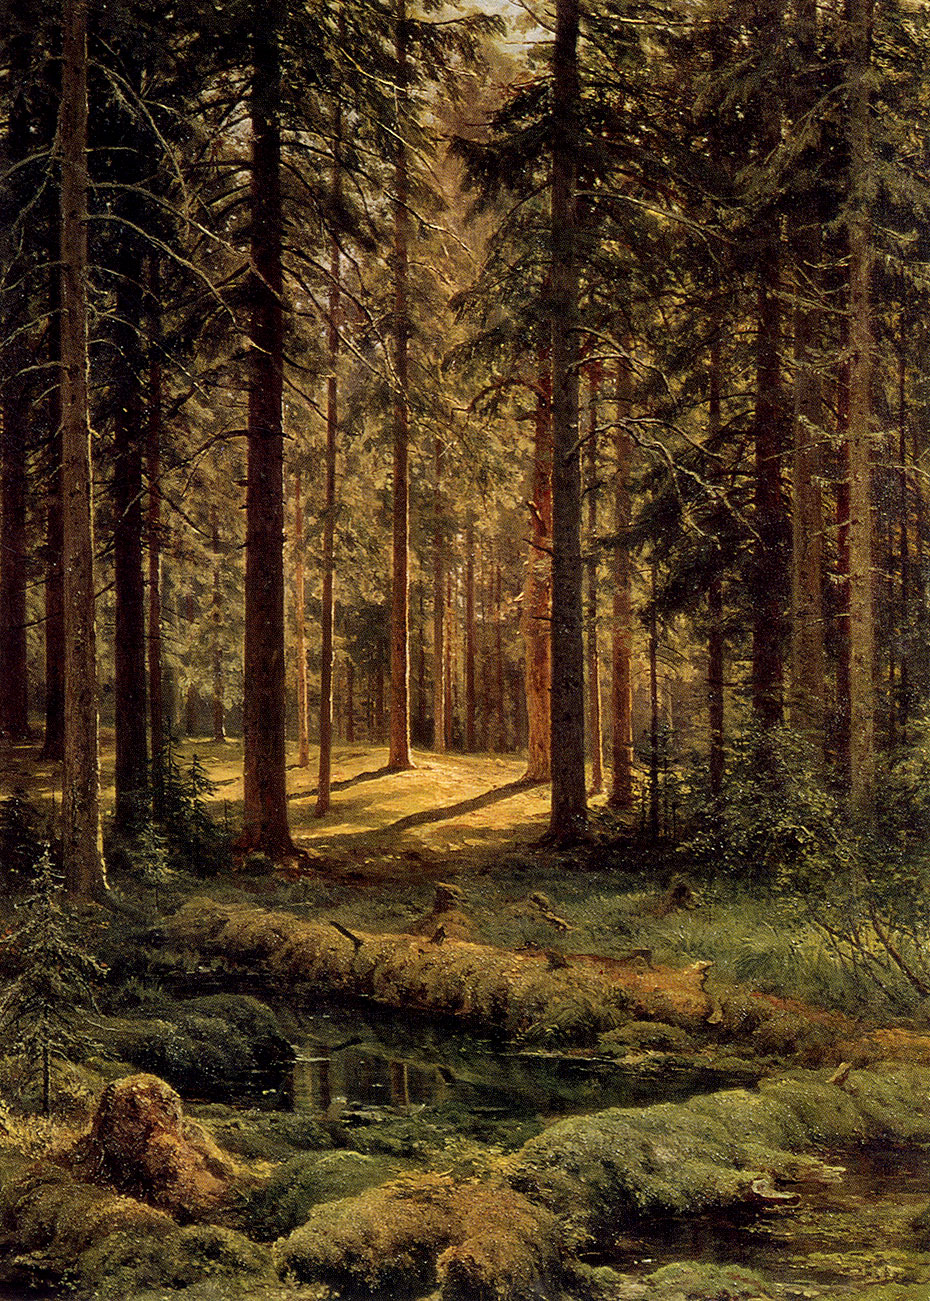 201. Pine forest. Sunny day. 1895. Oil on canvas. 137X103 cm. The Russian Museum, Leningrad